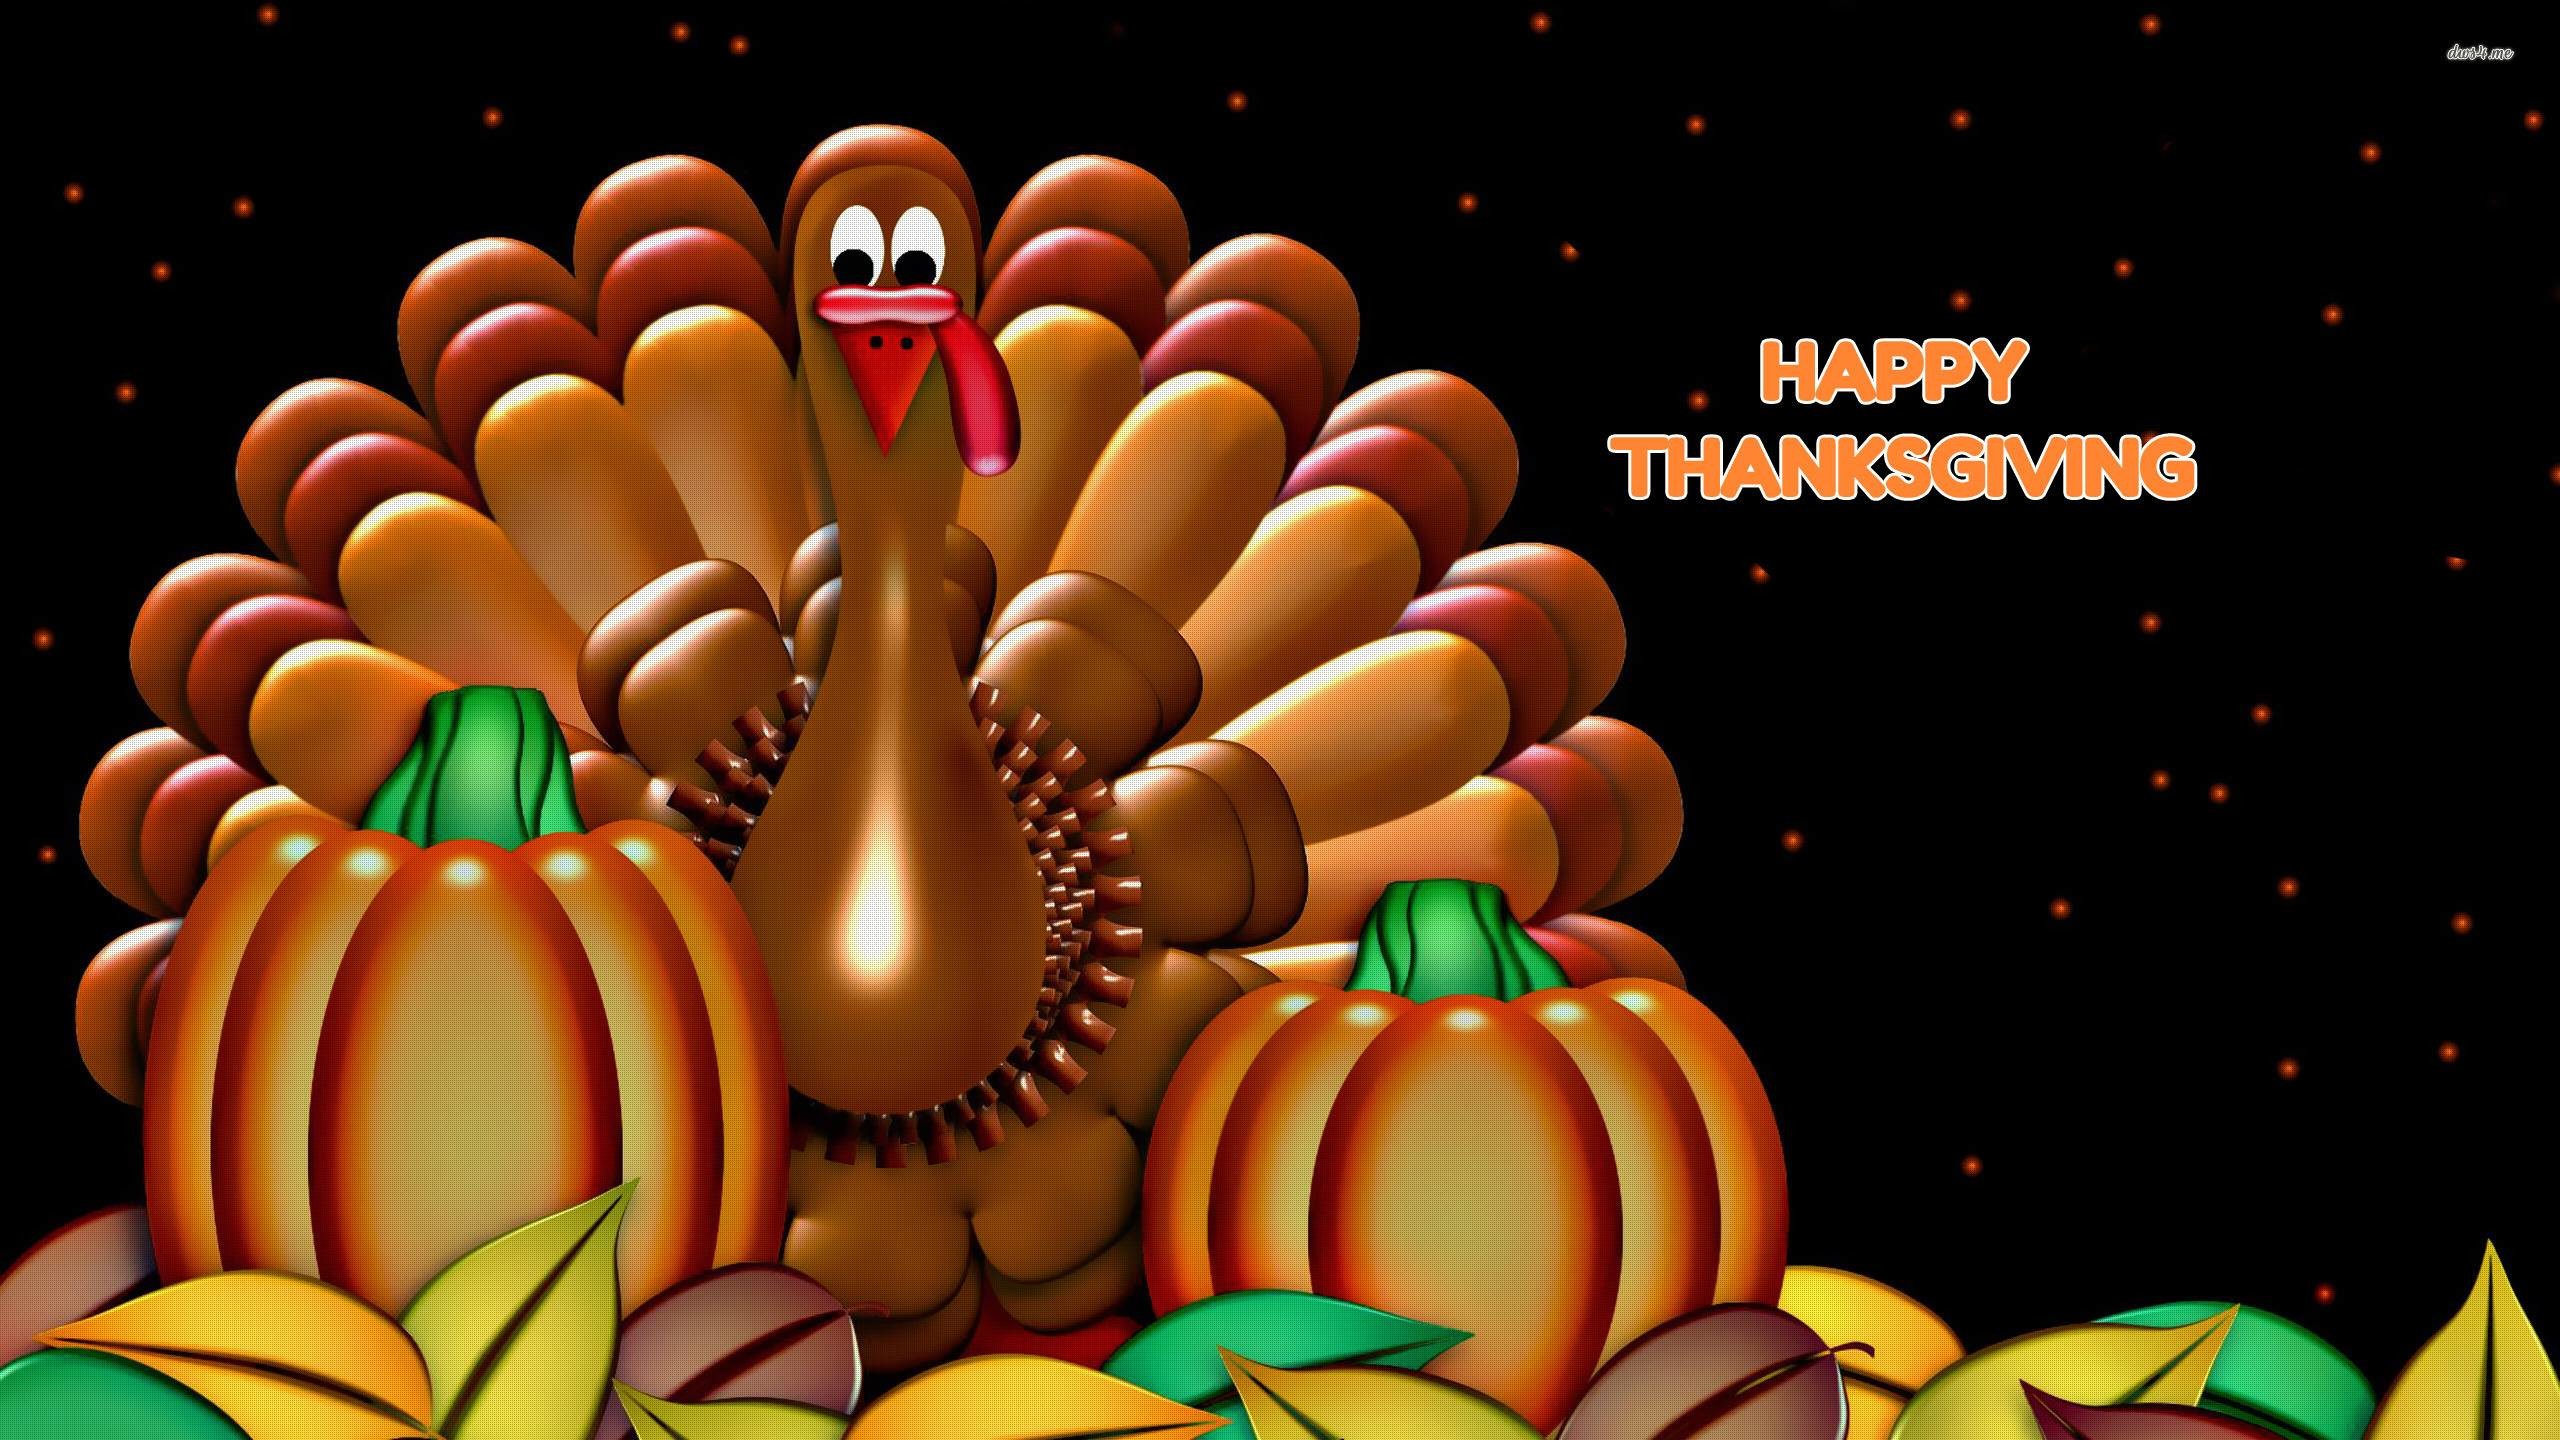 Thanksgiving Wallpapers And Screensavers.